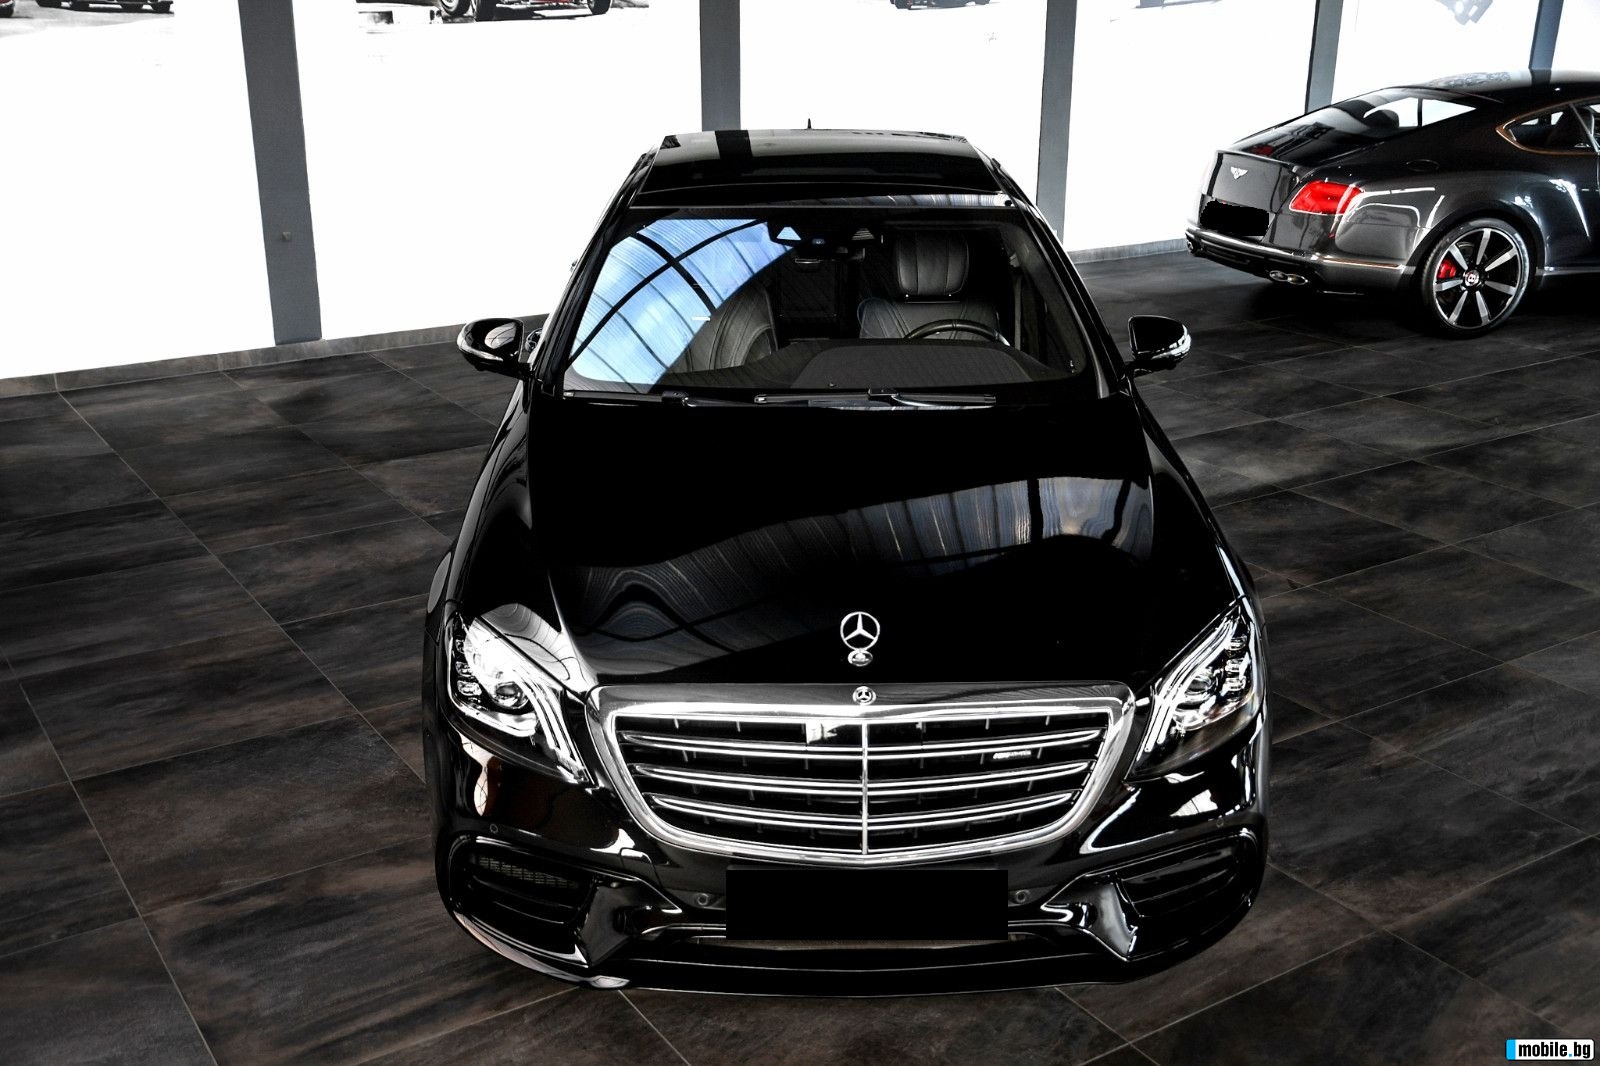 Mercedes-Benz S 63 AMG 4M+*LONG*EXCLUSIVE*PANO*NIGHT* | Mobile.bg   1